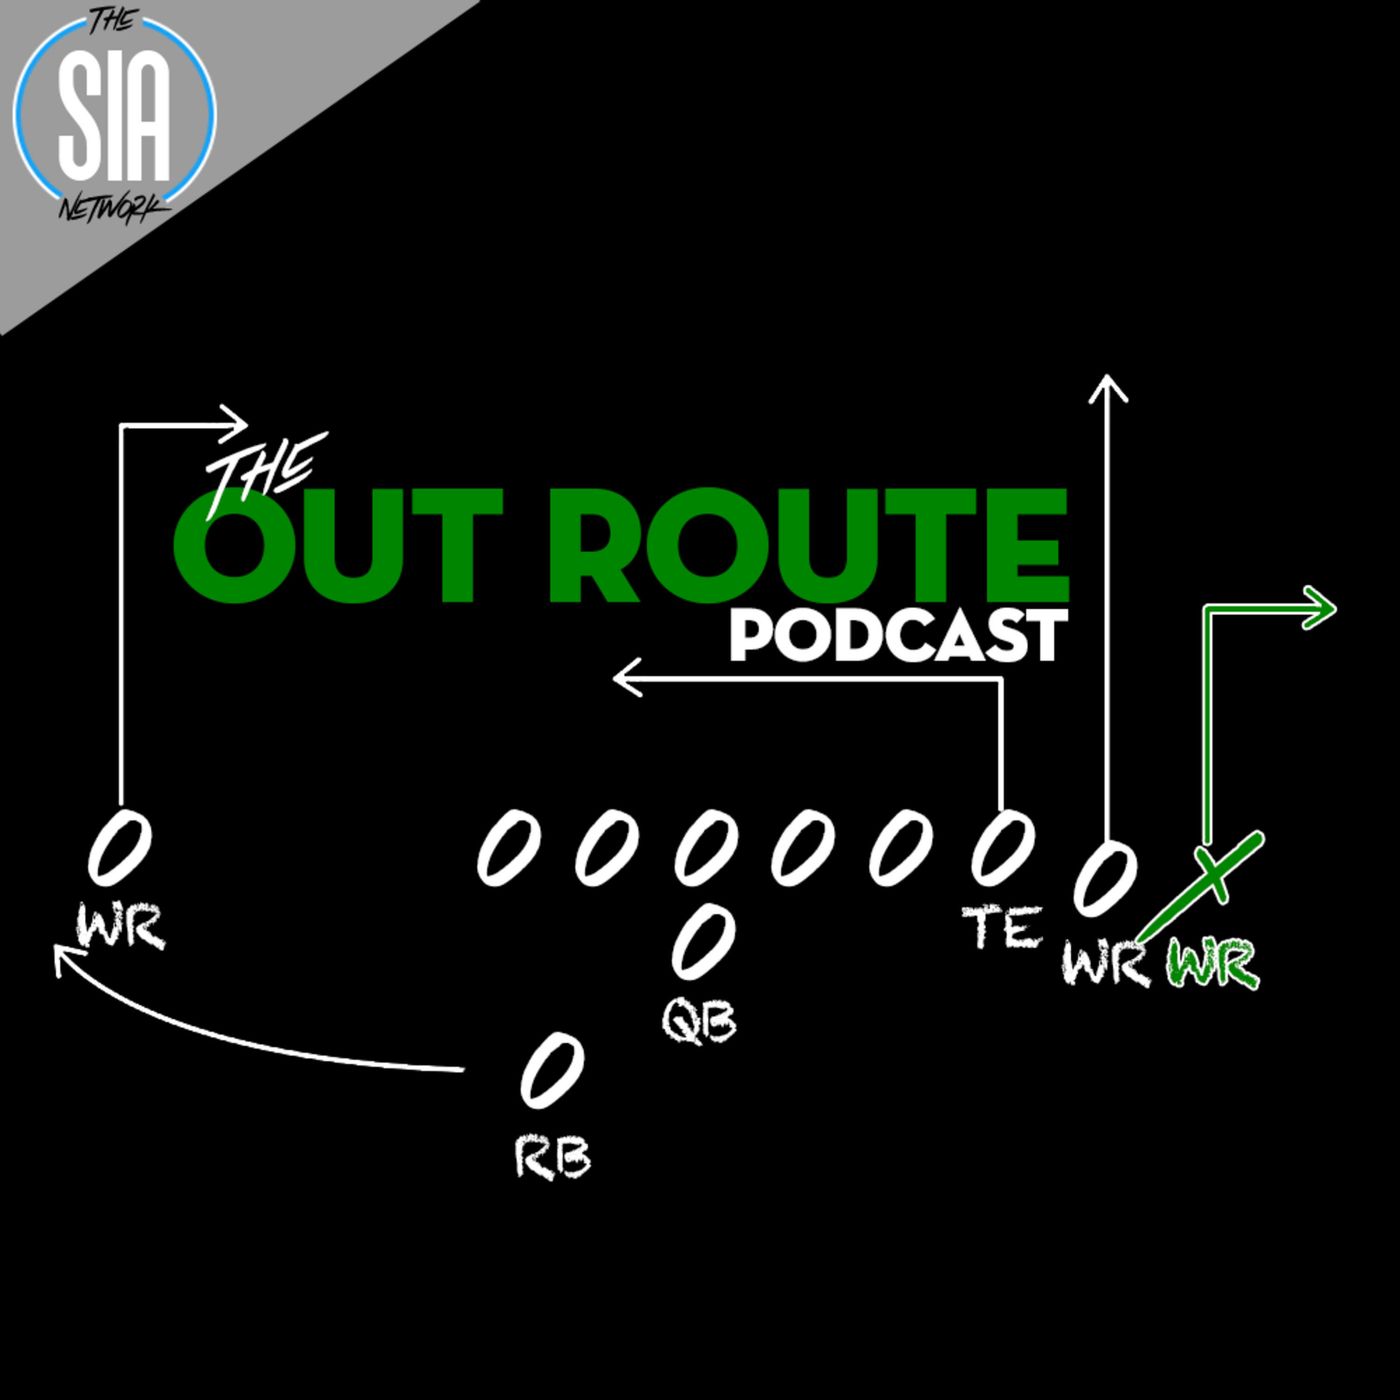 The Out Route - Cowboy's Questions and Bell's Future